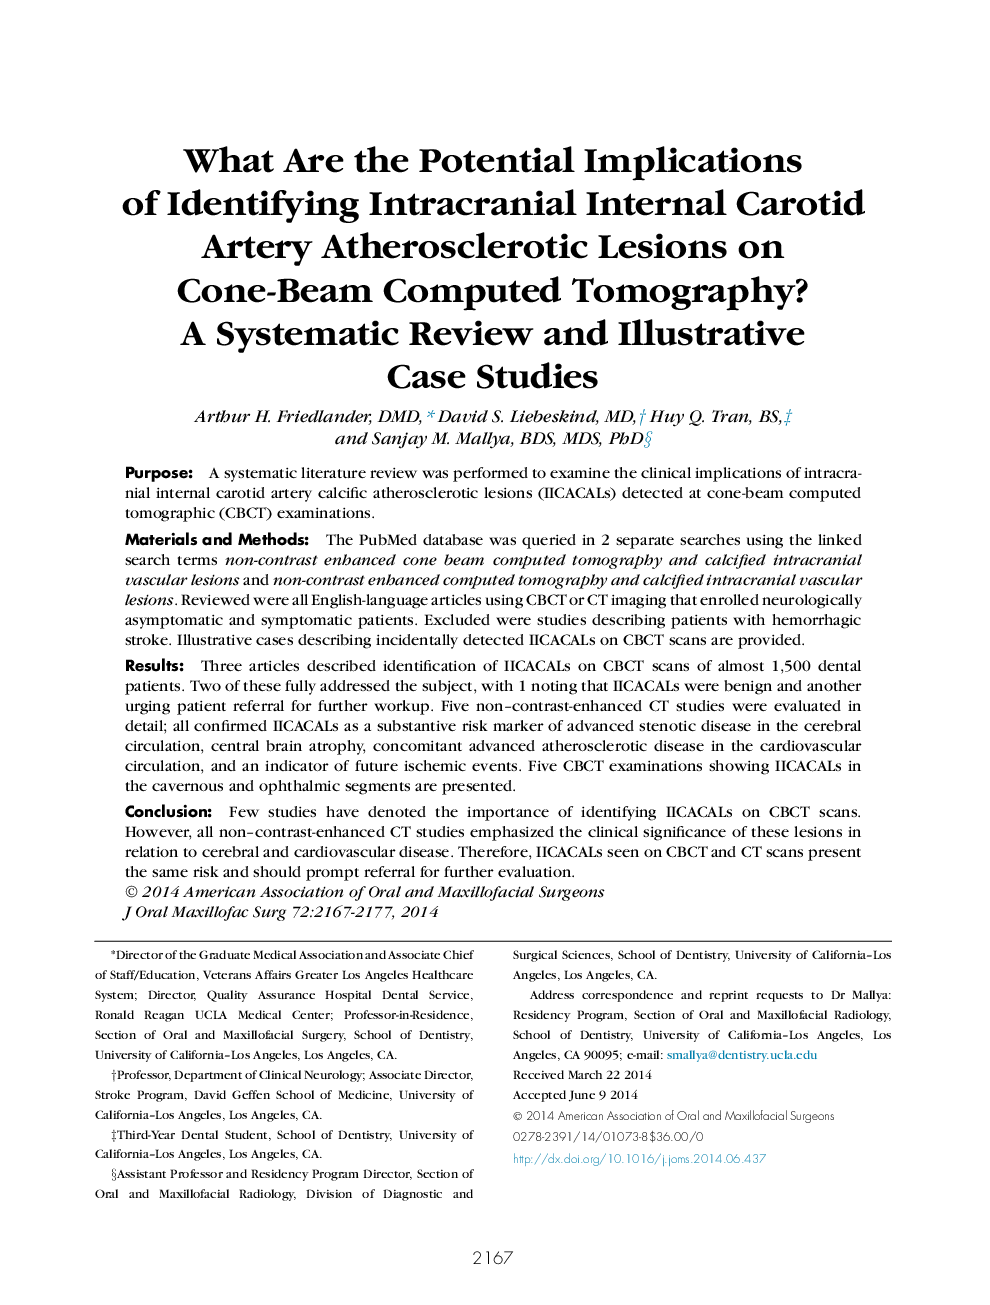 What Are the Potential Implications of Identifying Intracranial Internal Carotid Artery Atherosclerotic Lesions on Cone-Beam Computed Tomography? A Systematic Review and Illustrative Case Studies